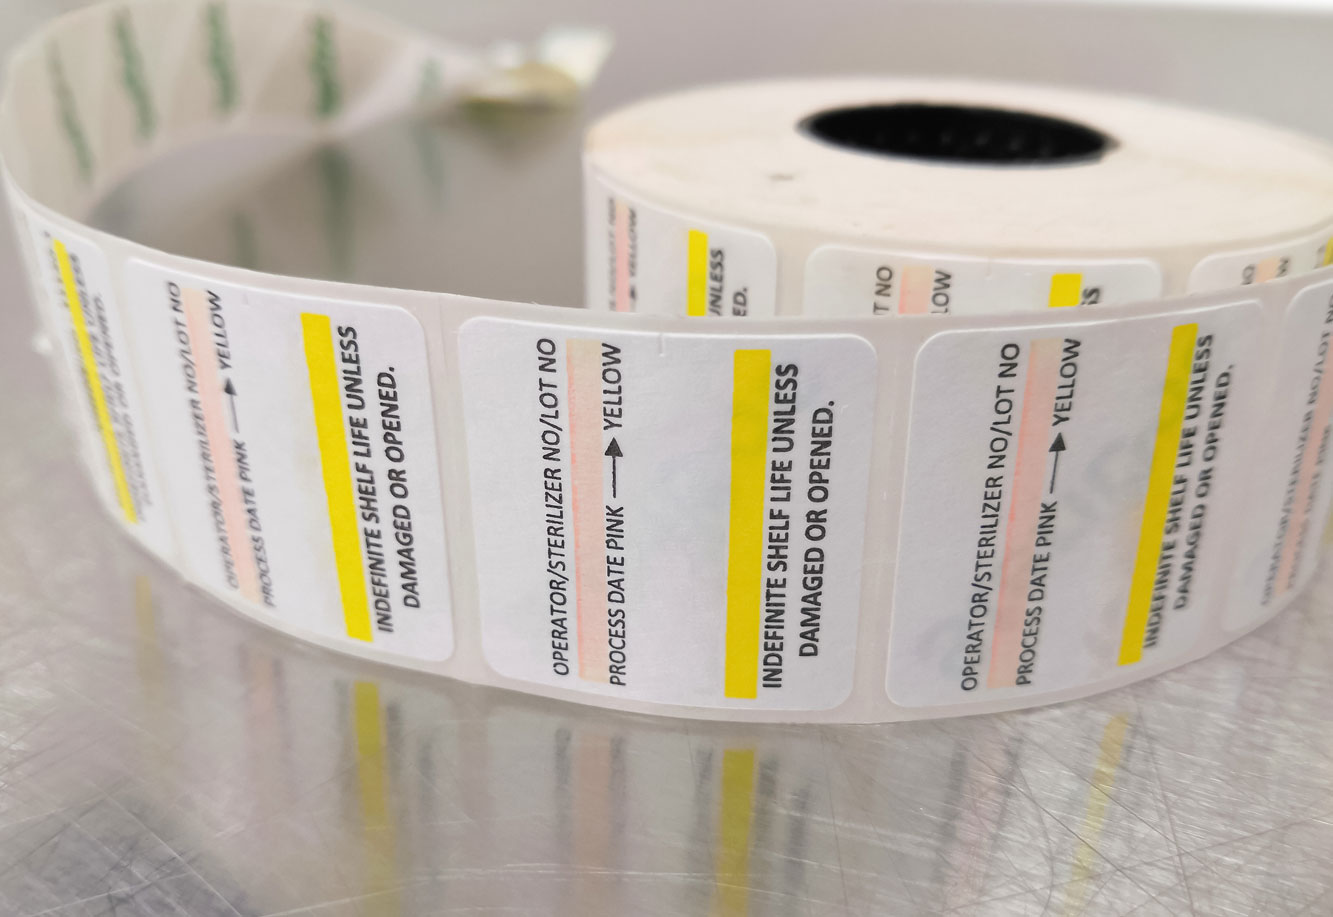 Labels on the Roll Printing